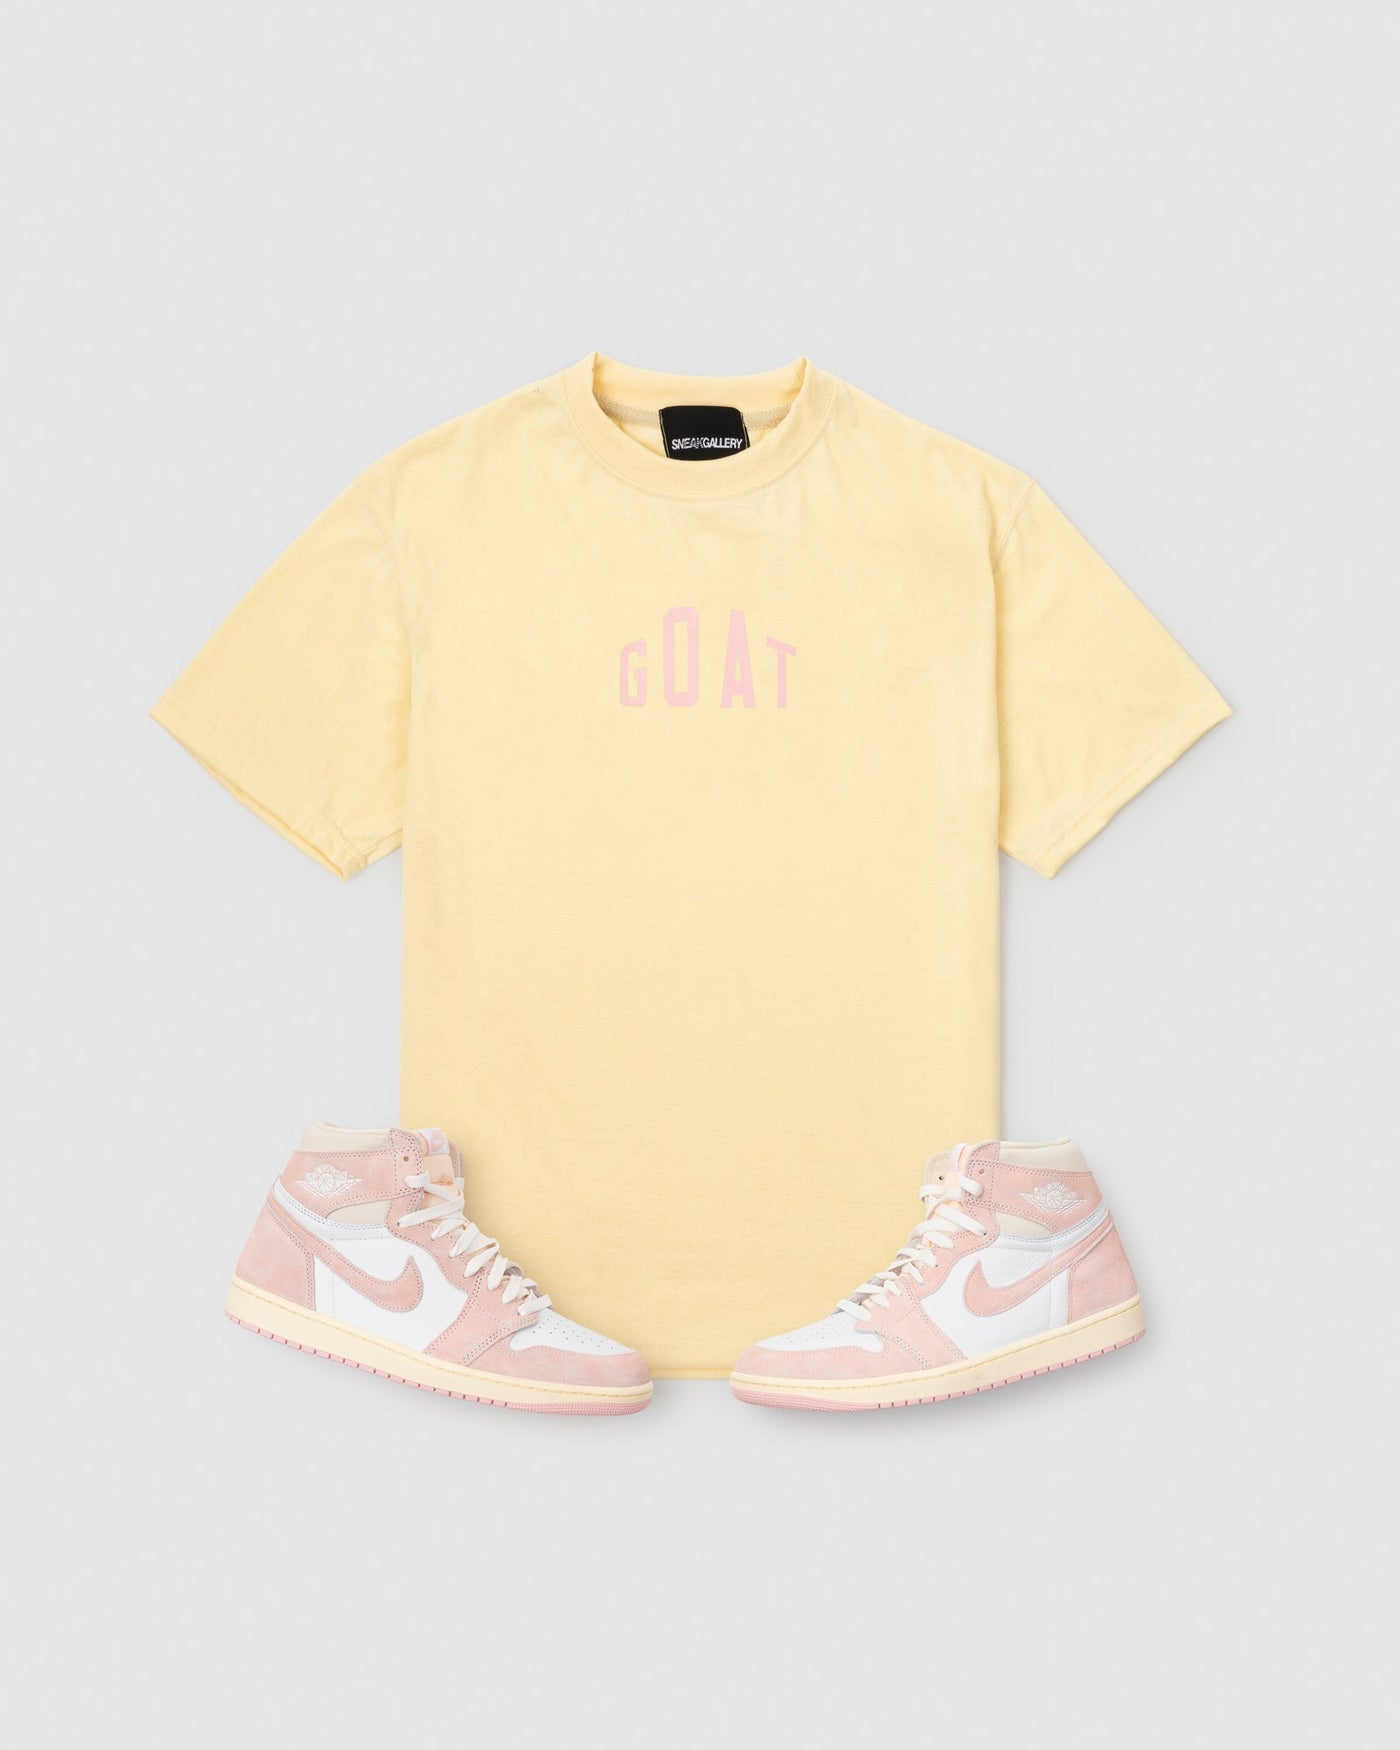 GOAT Big Arch Tee (Sail/Washed Pink)